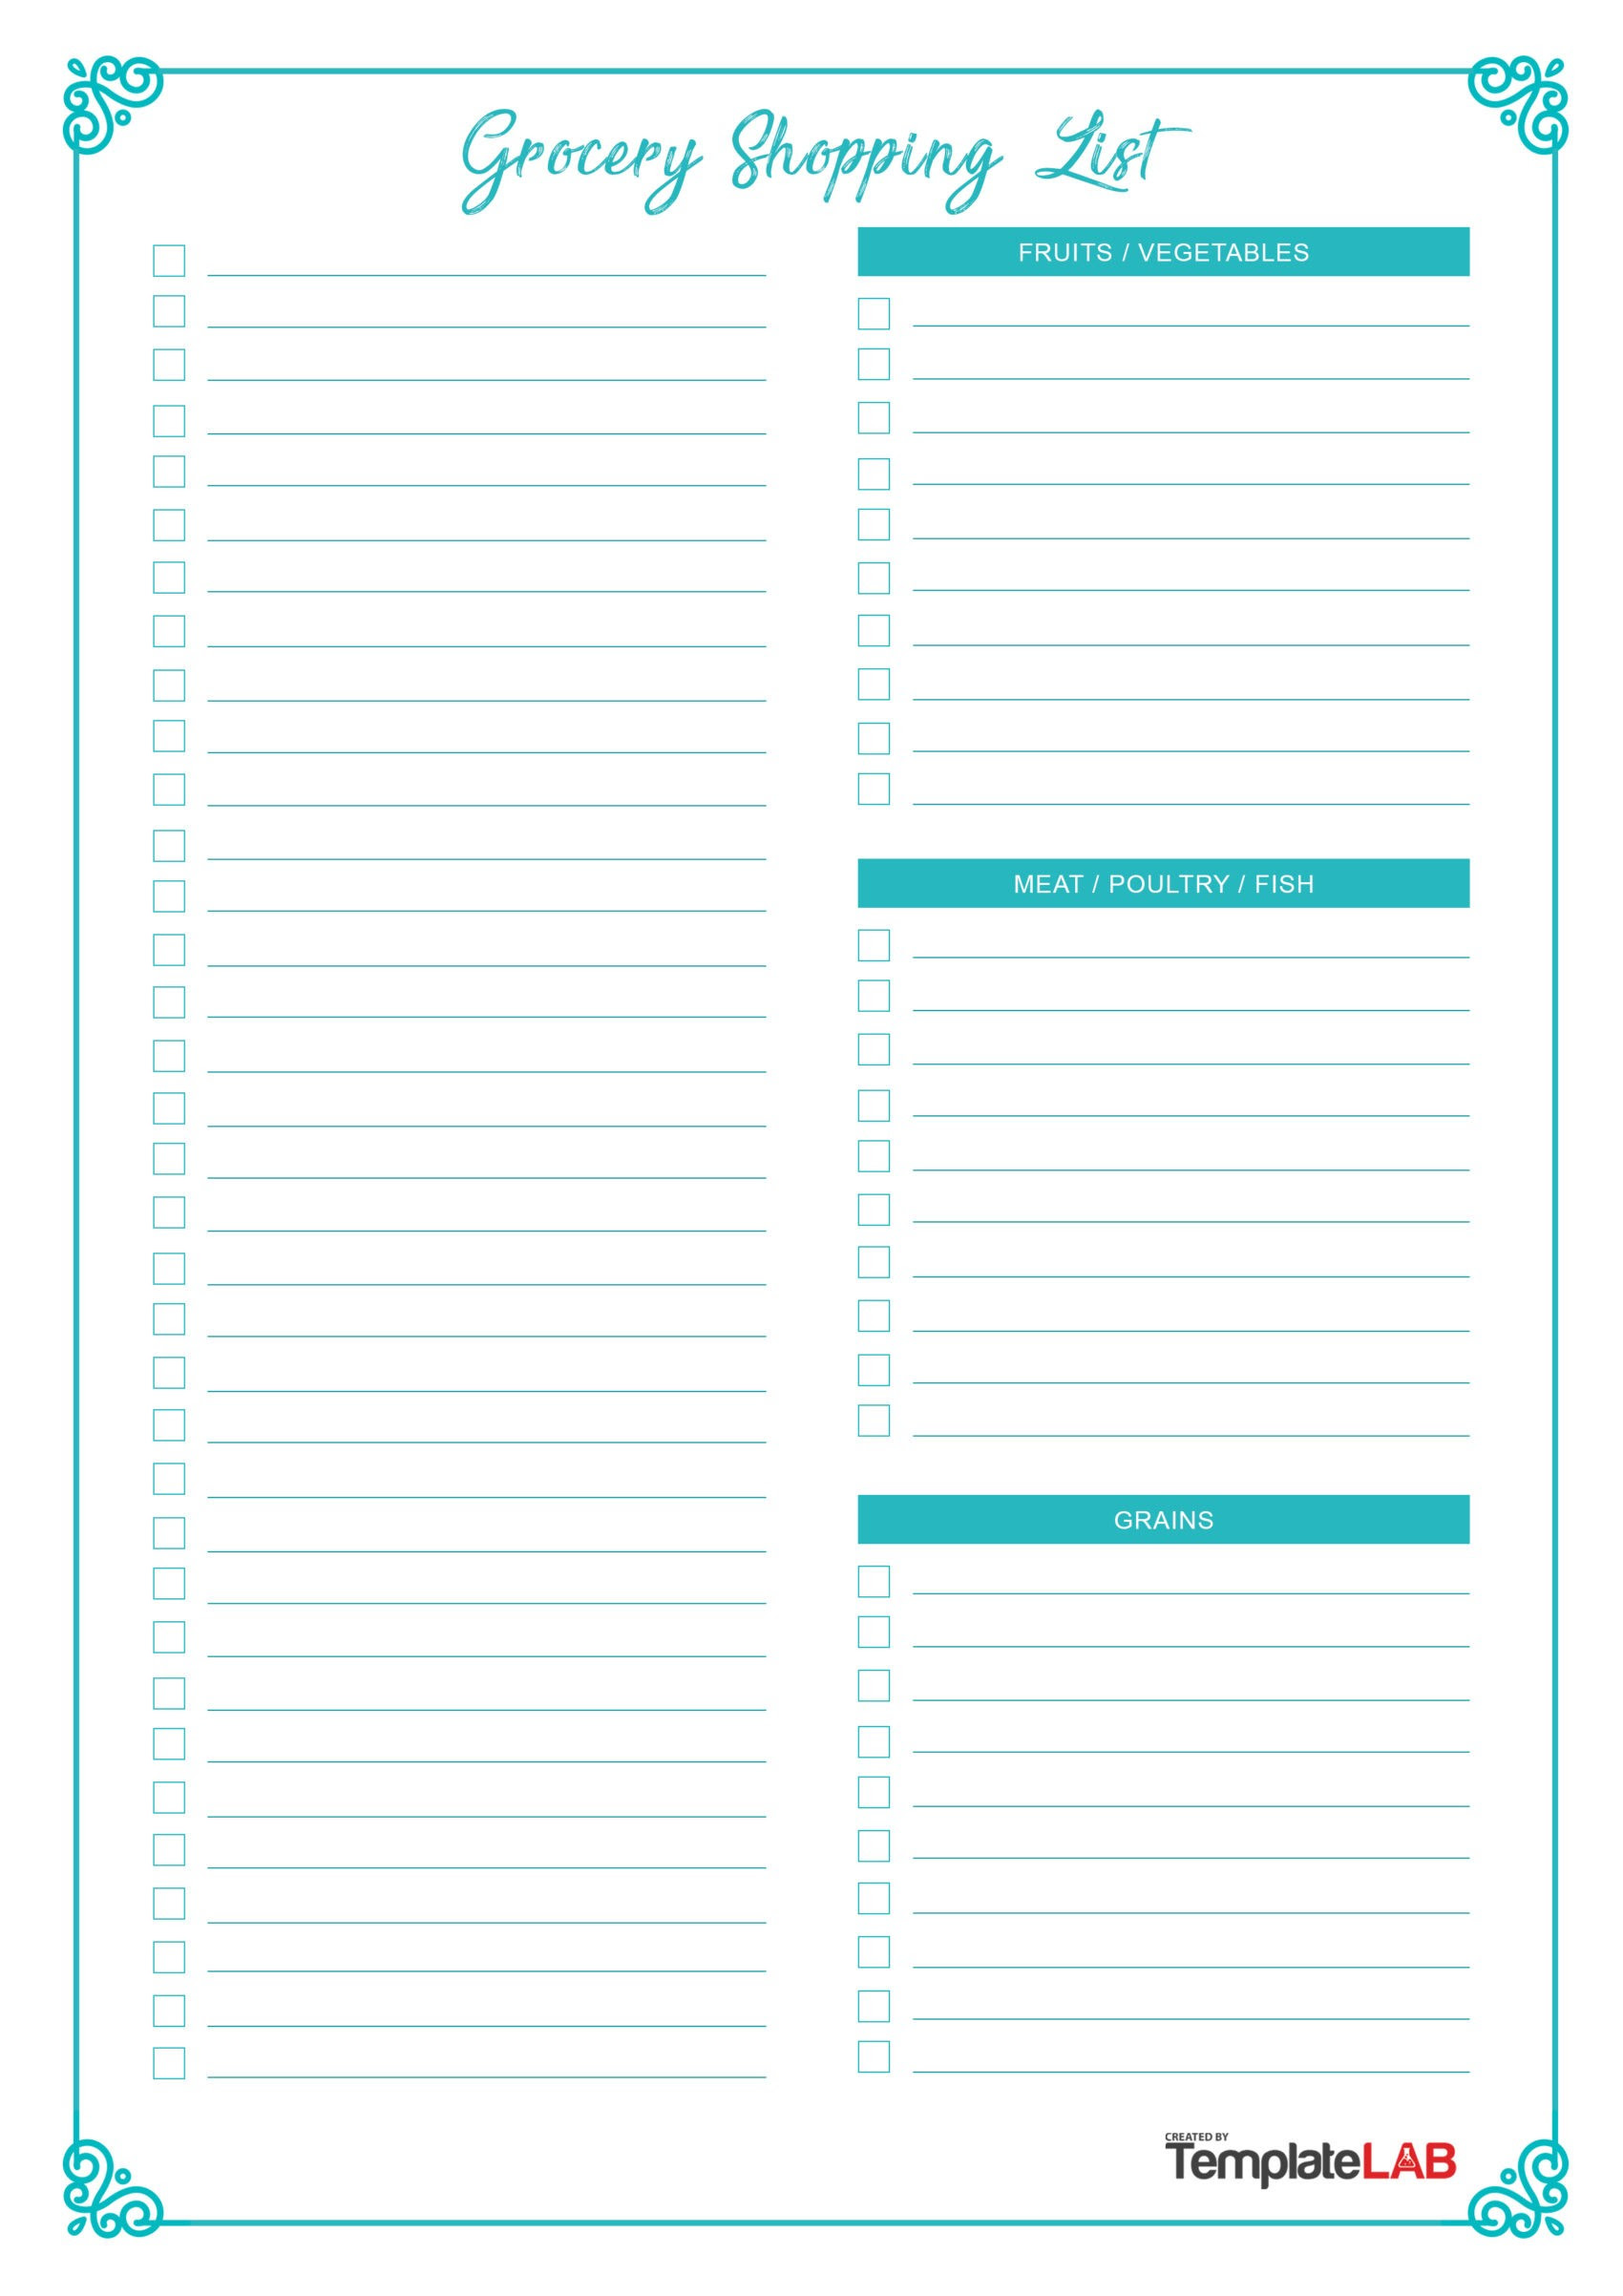 Checklist Full page Blue Printable Weekly Grocery List Instant In Blank Grocery Shopping List Template